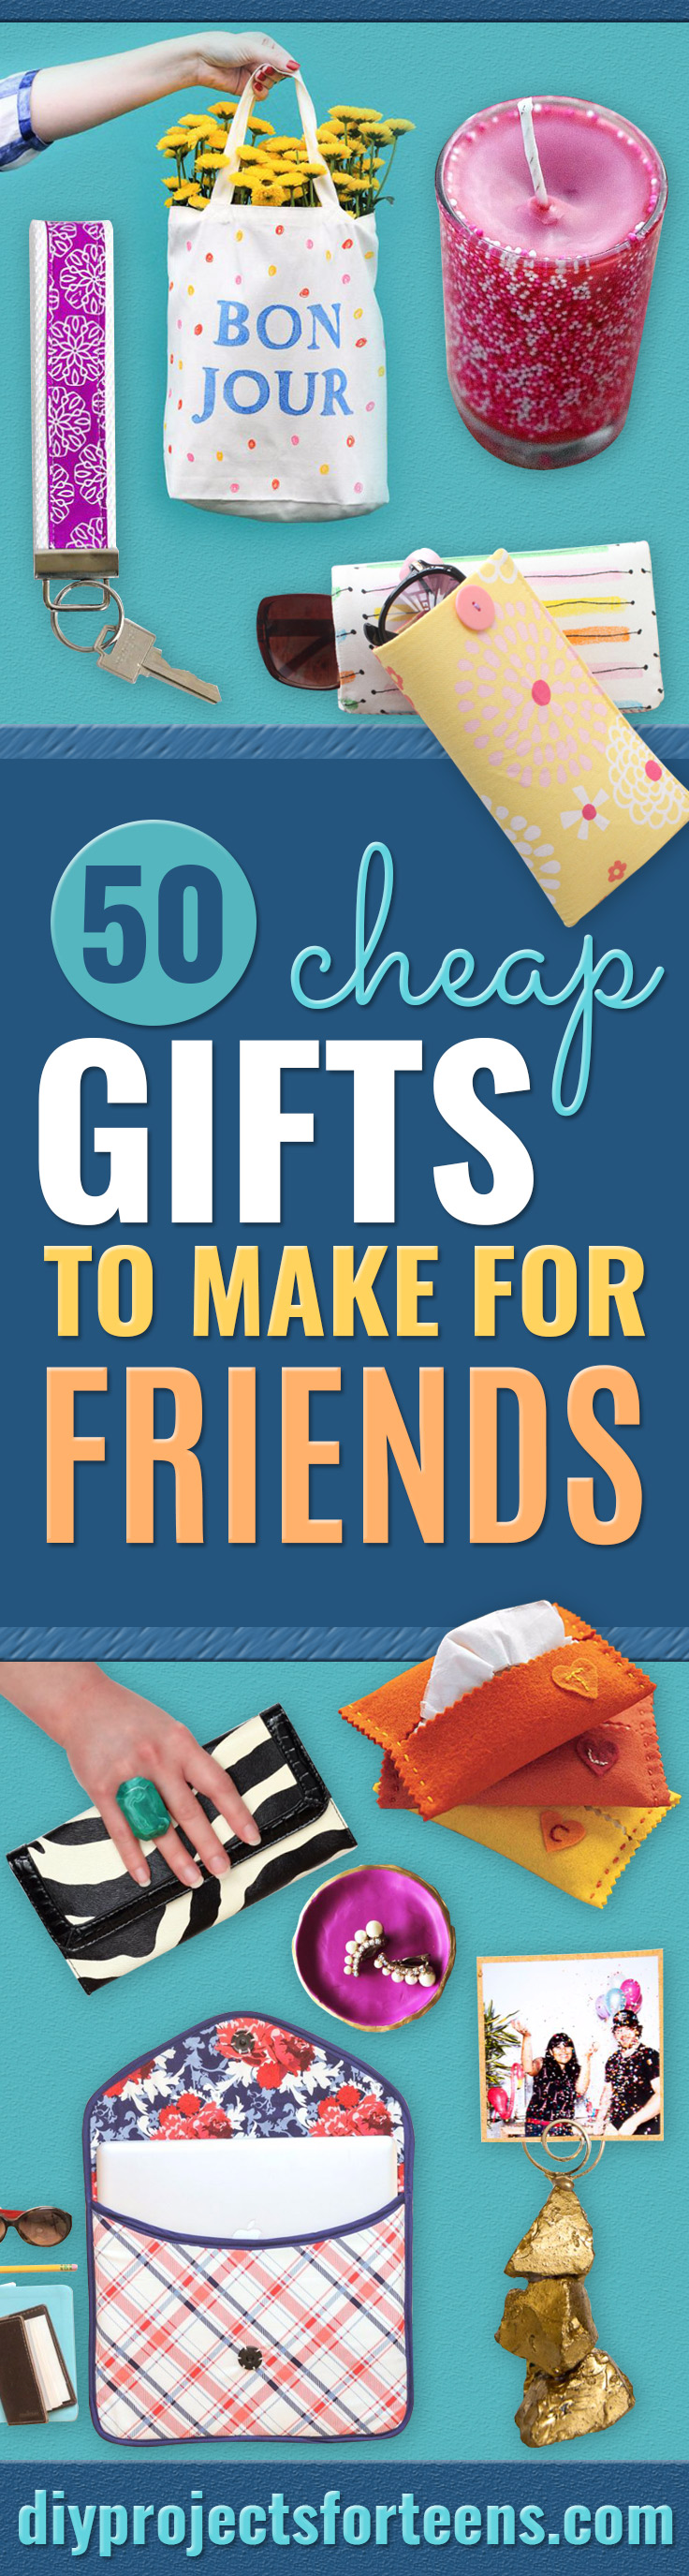 Cheap DIY Gifts and Inexpensive Homemade Christmas Gift Ideas for People on A Budget - To Make These Cool Presents Instead of Buying for the Holidays - Easy and Low Cost Gifts fTo Make For Friends and Neighbors - Quick Dollar Store Crafts and Projects for Xmas Gift Giving Parties - Step by Step Tutorials and Instructions #diygifts #teencrafts #diyideas #crafts #christmasgifts #cheapgifts